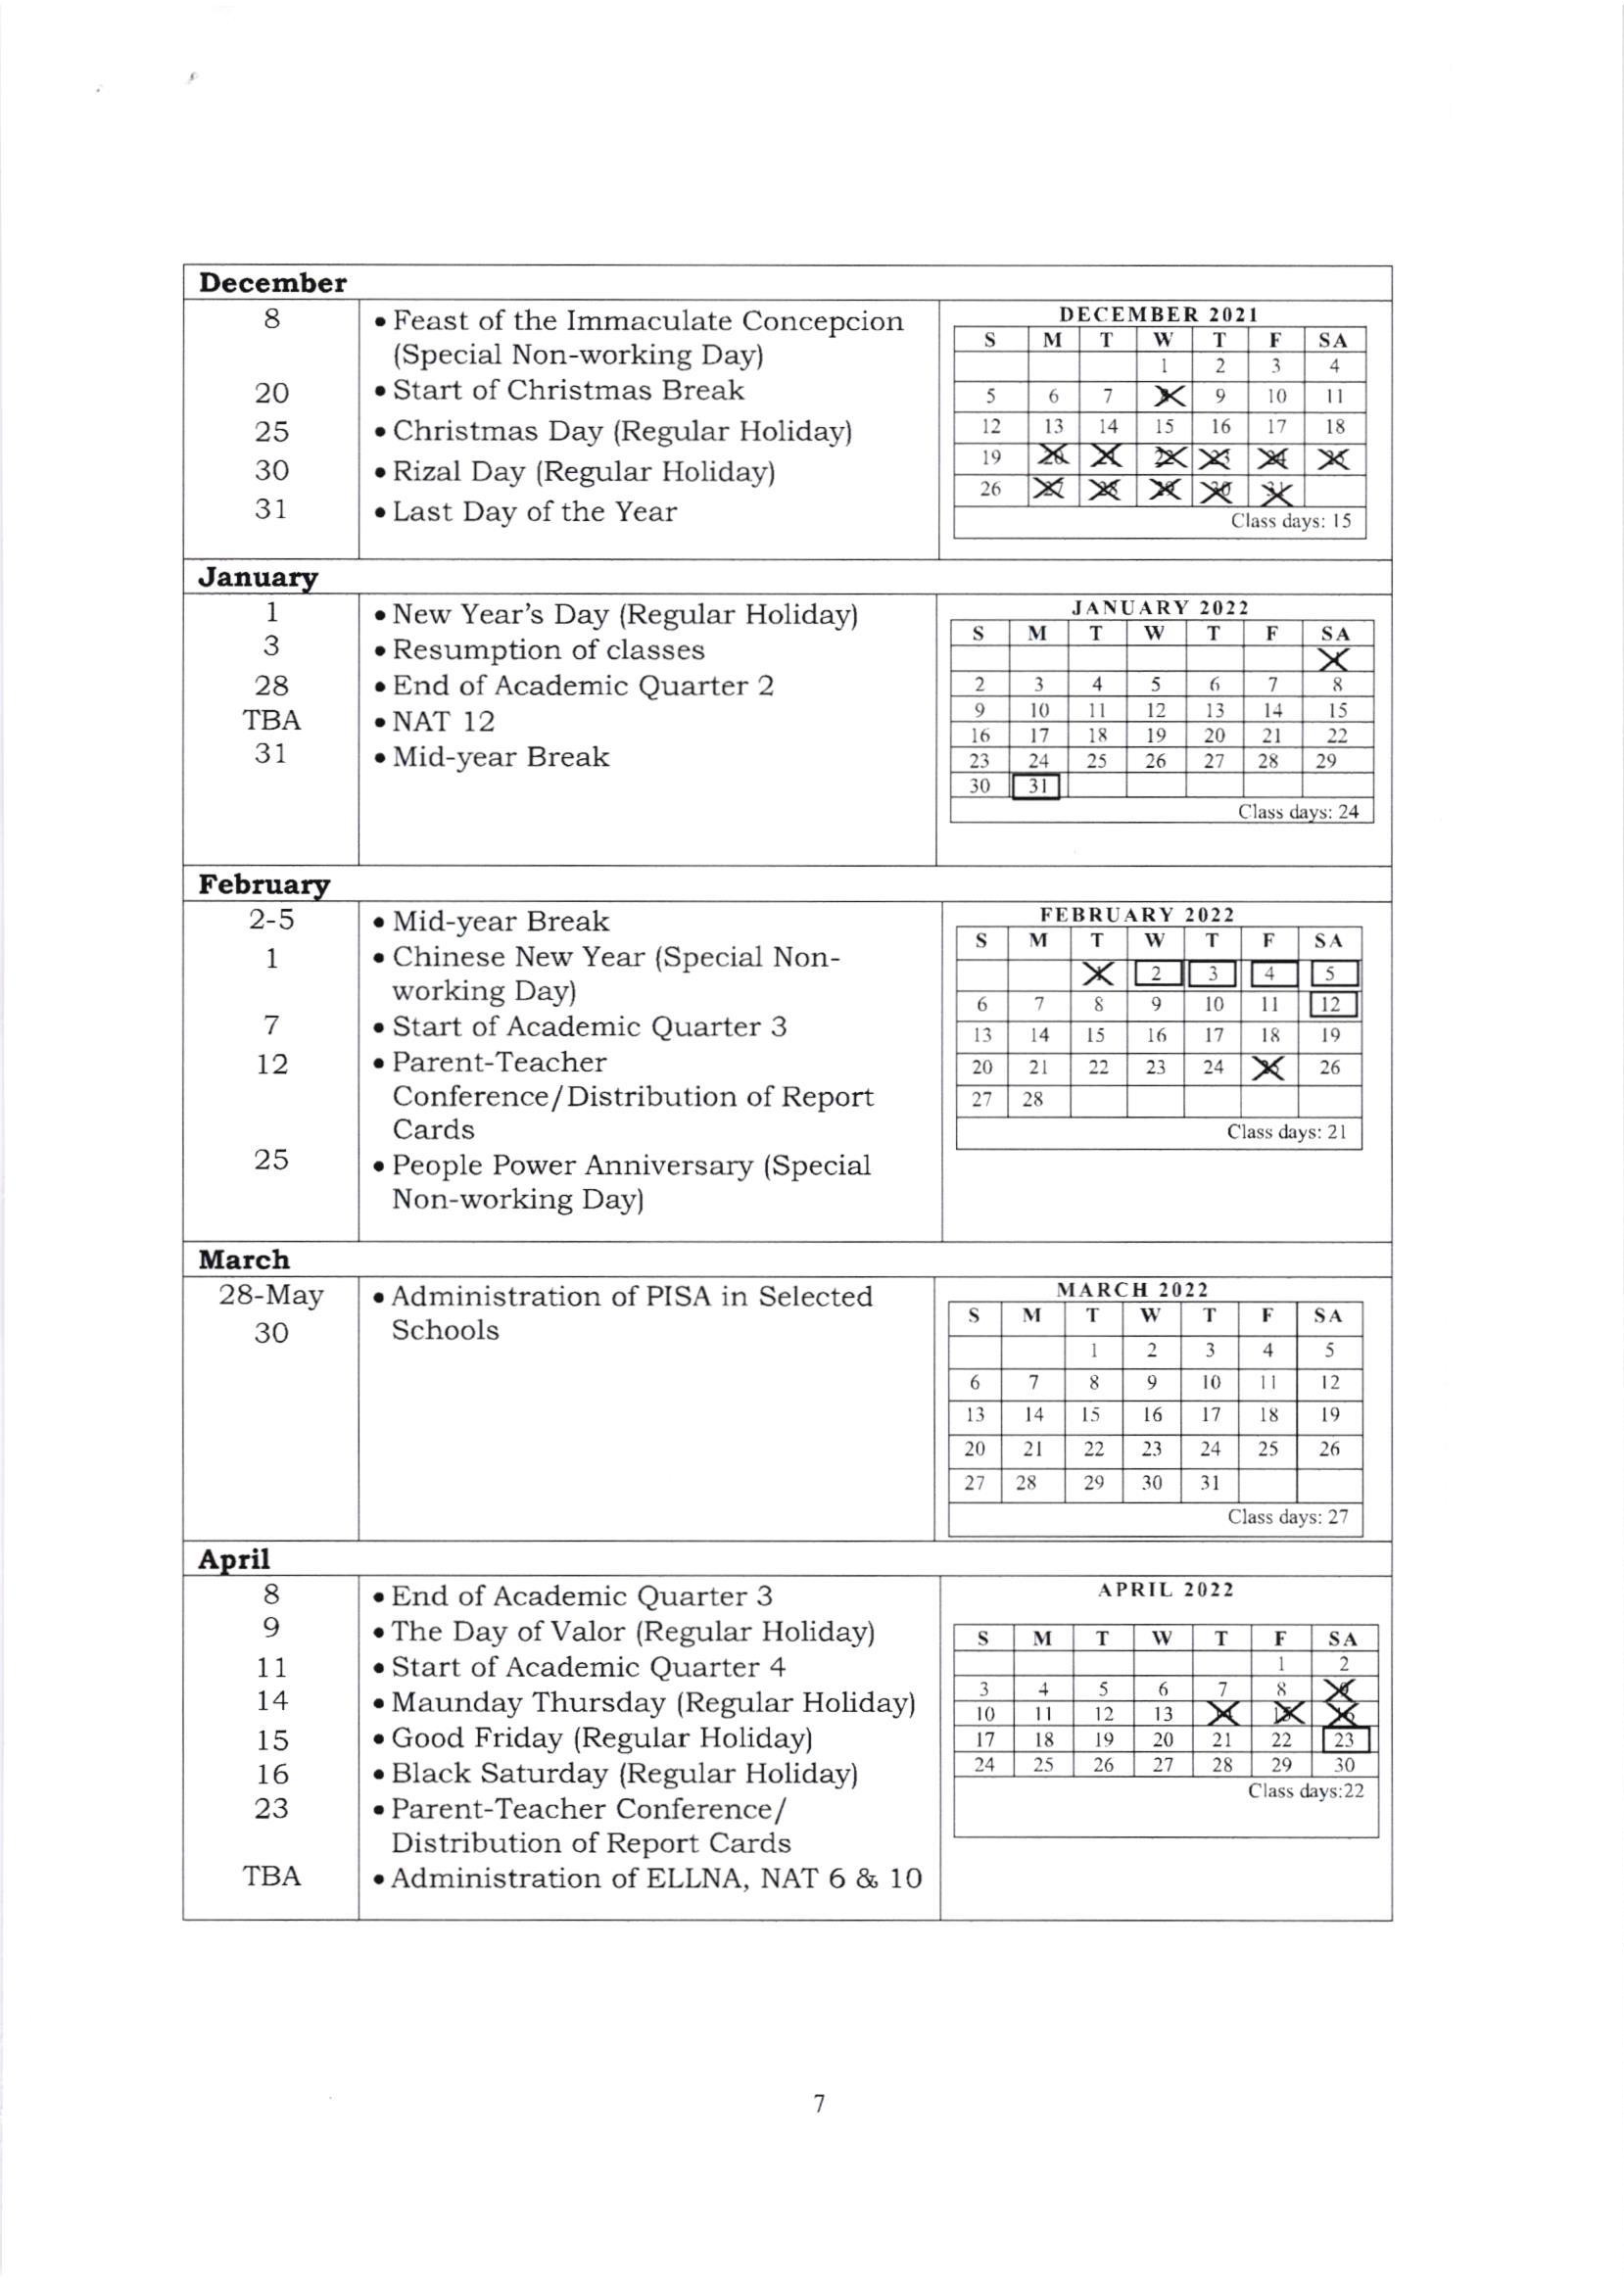 deped-released-official-school-calendar-and-activities-for-sy-2021-2022